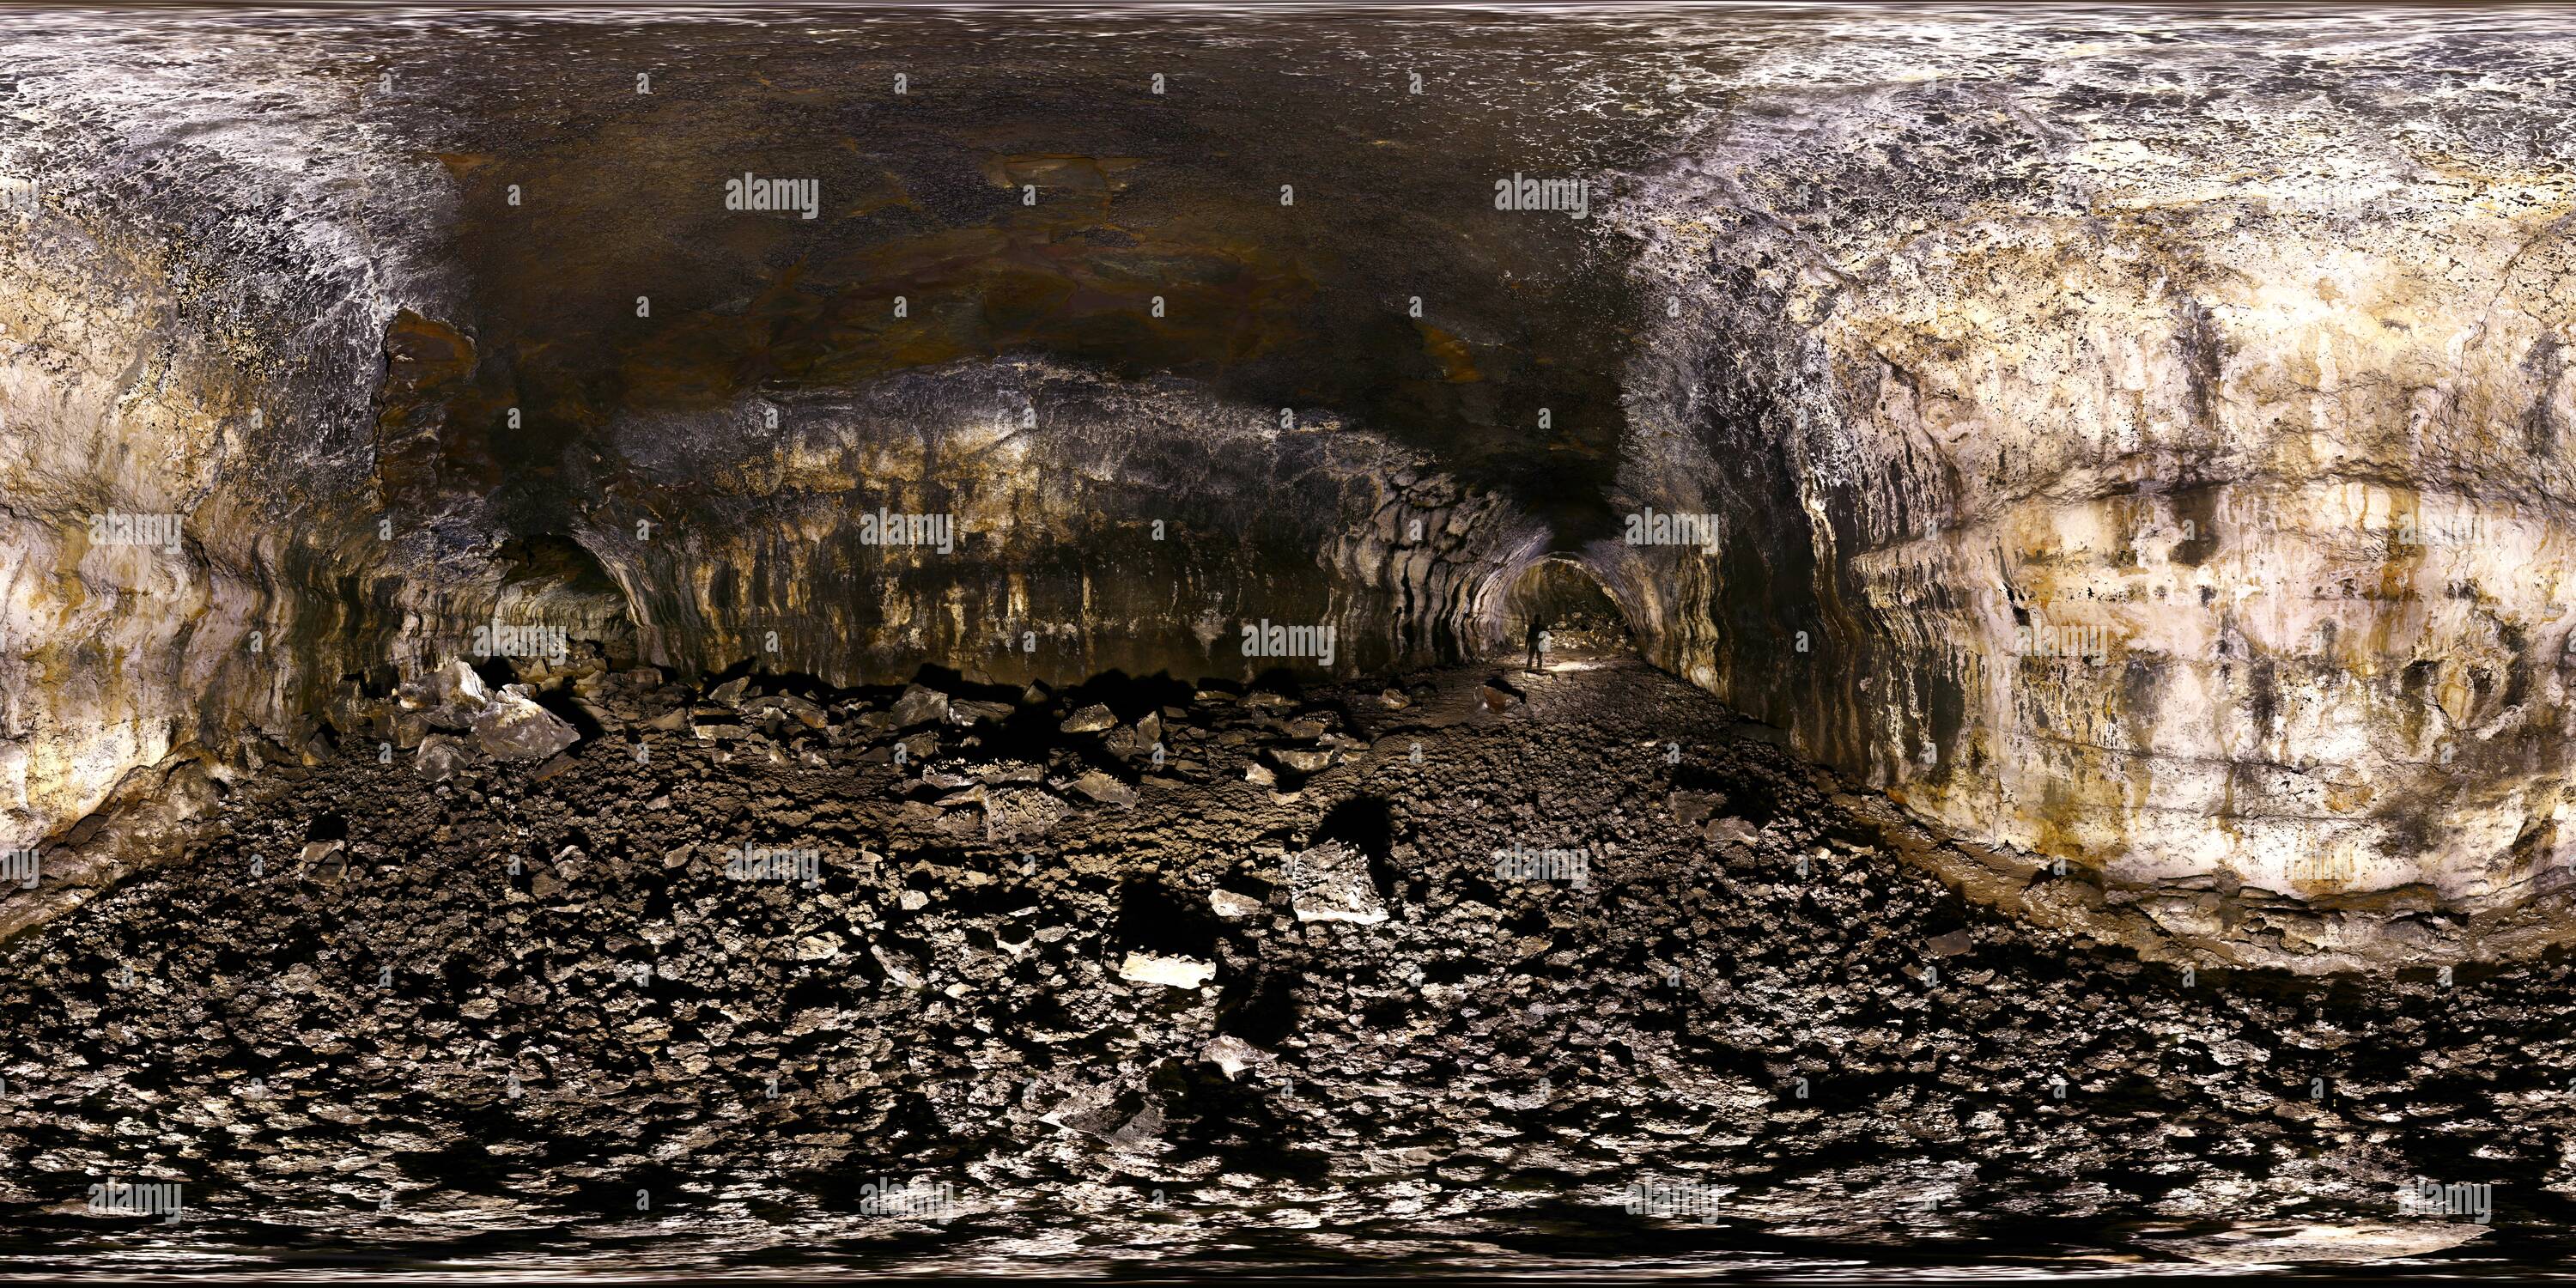 360 degree panoramic view of Arnold Ice Cave [1]